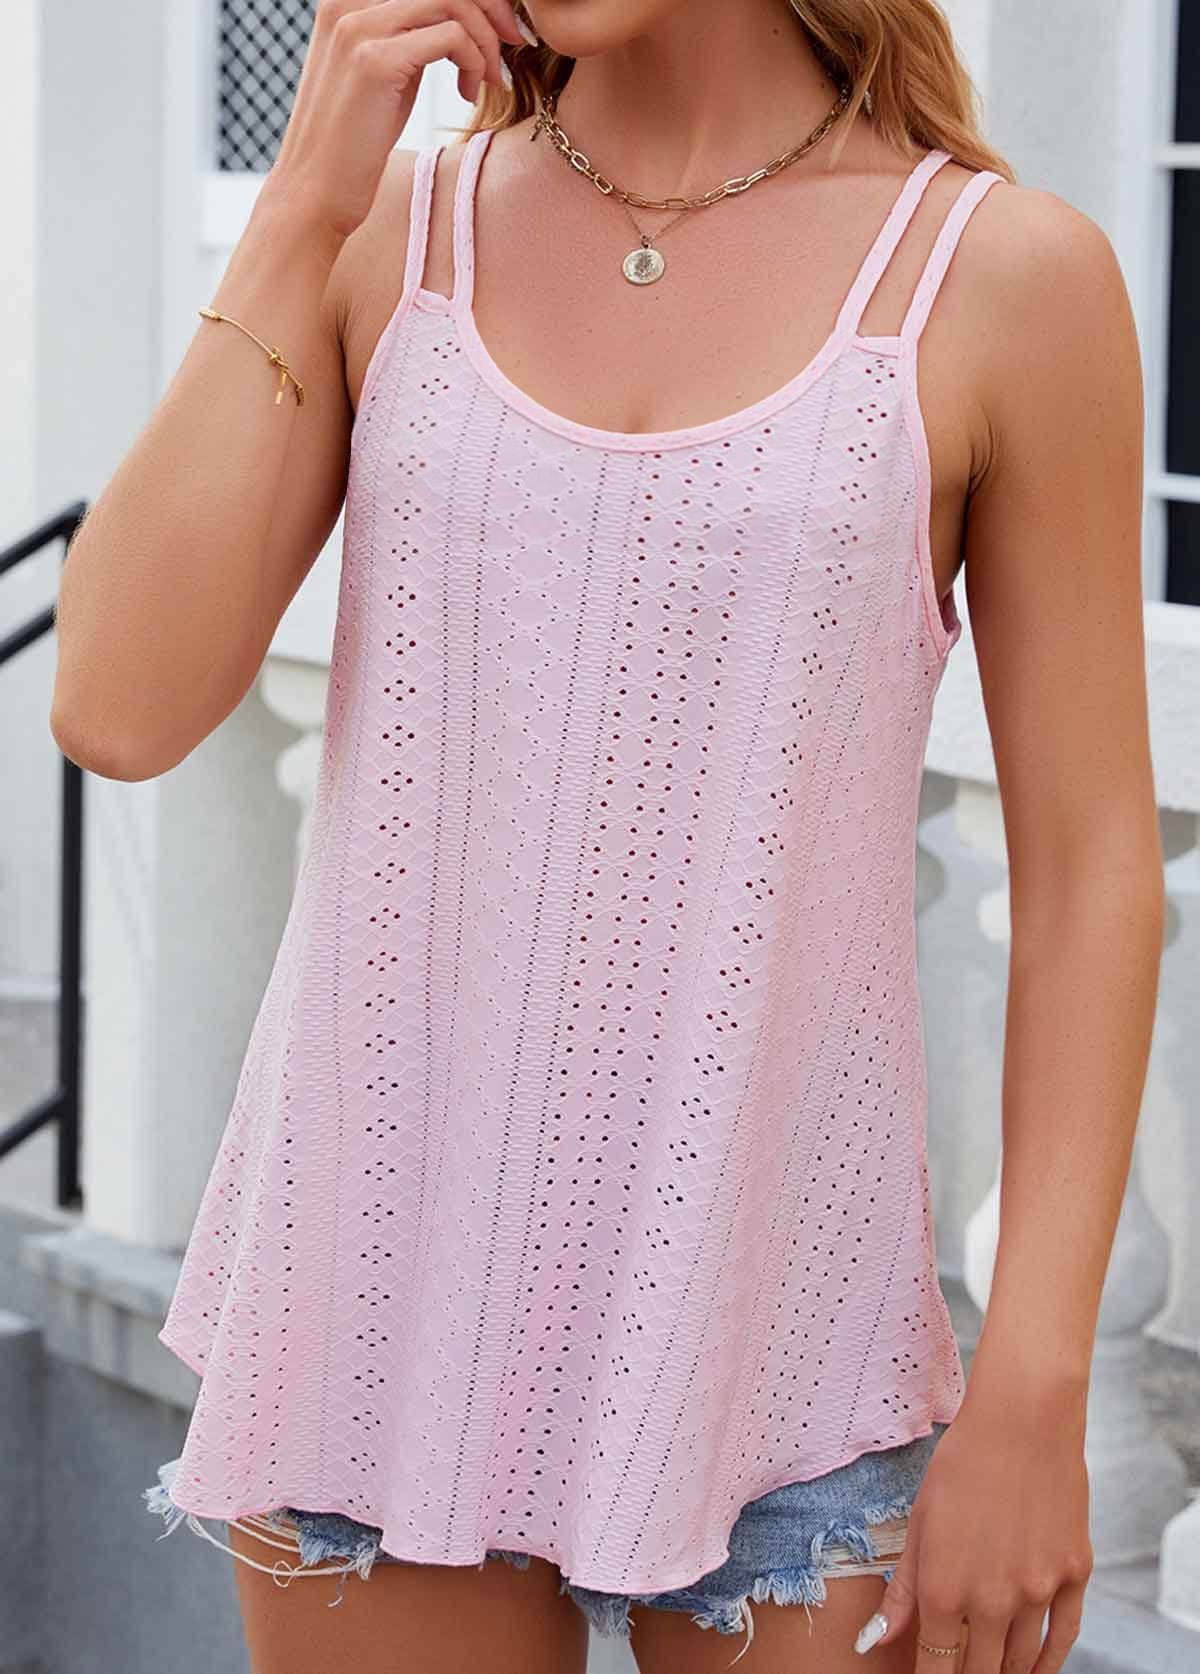 Double Straps Hole Pink Scoop Neck Camisole Top